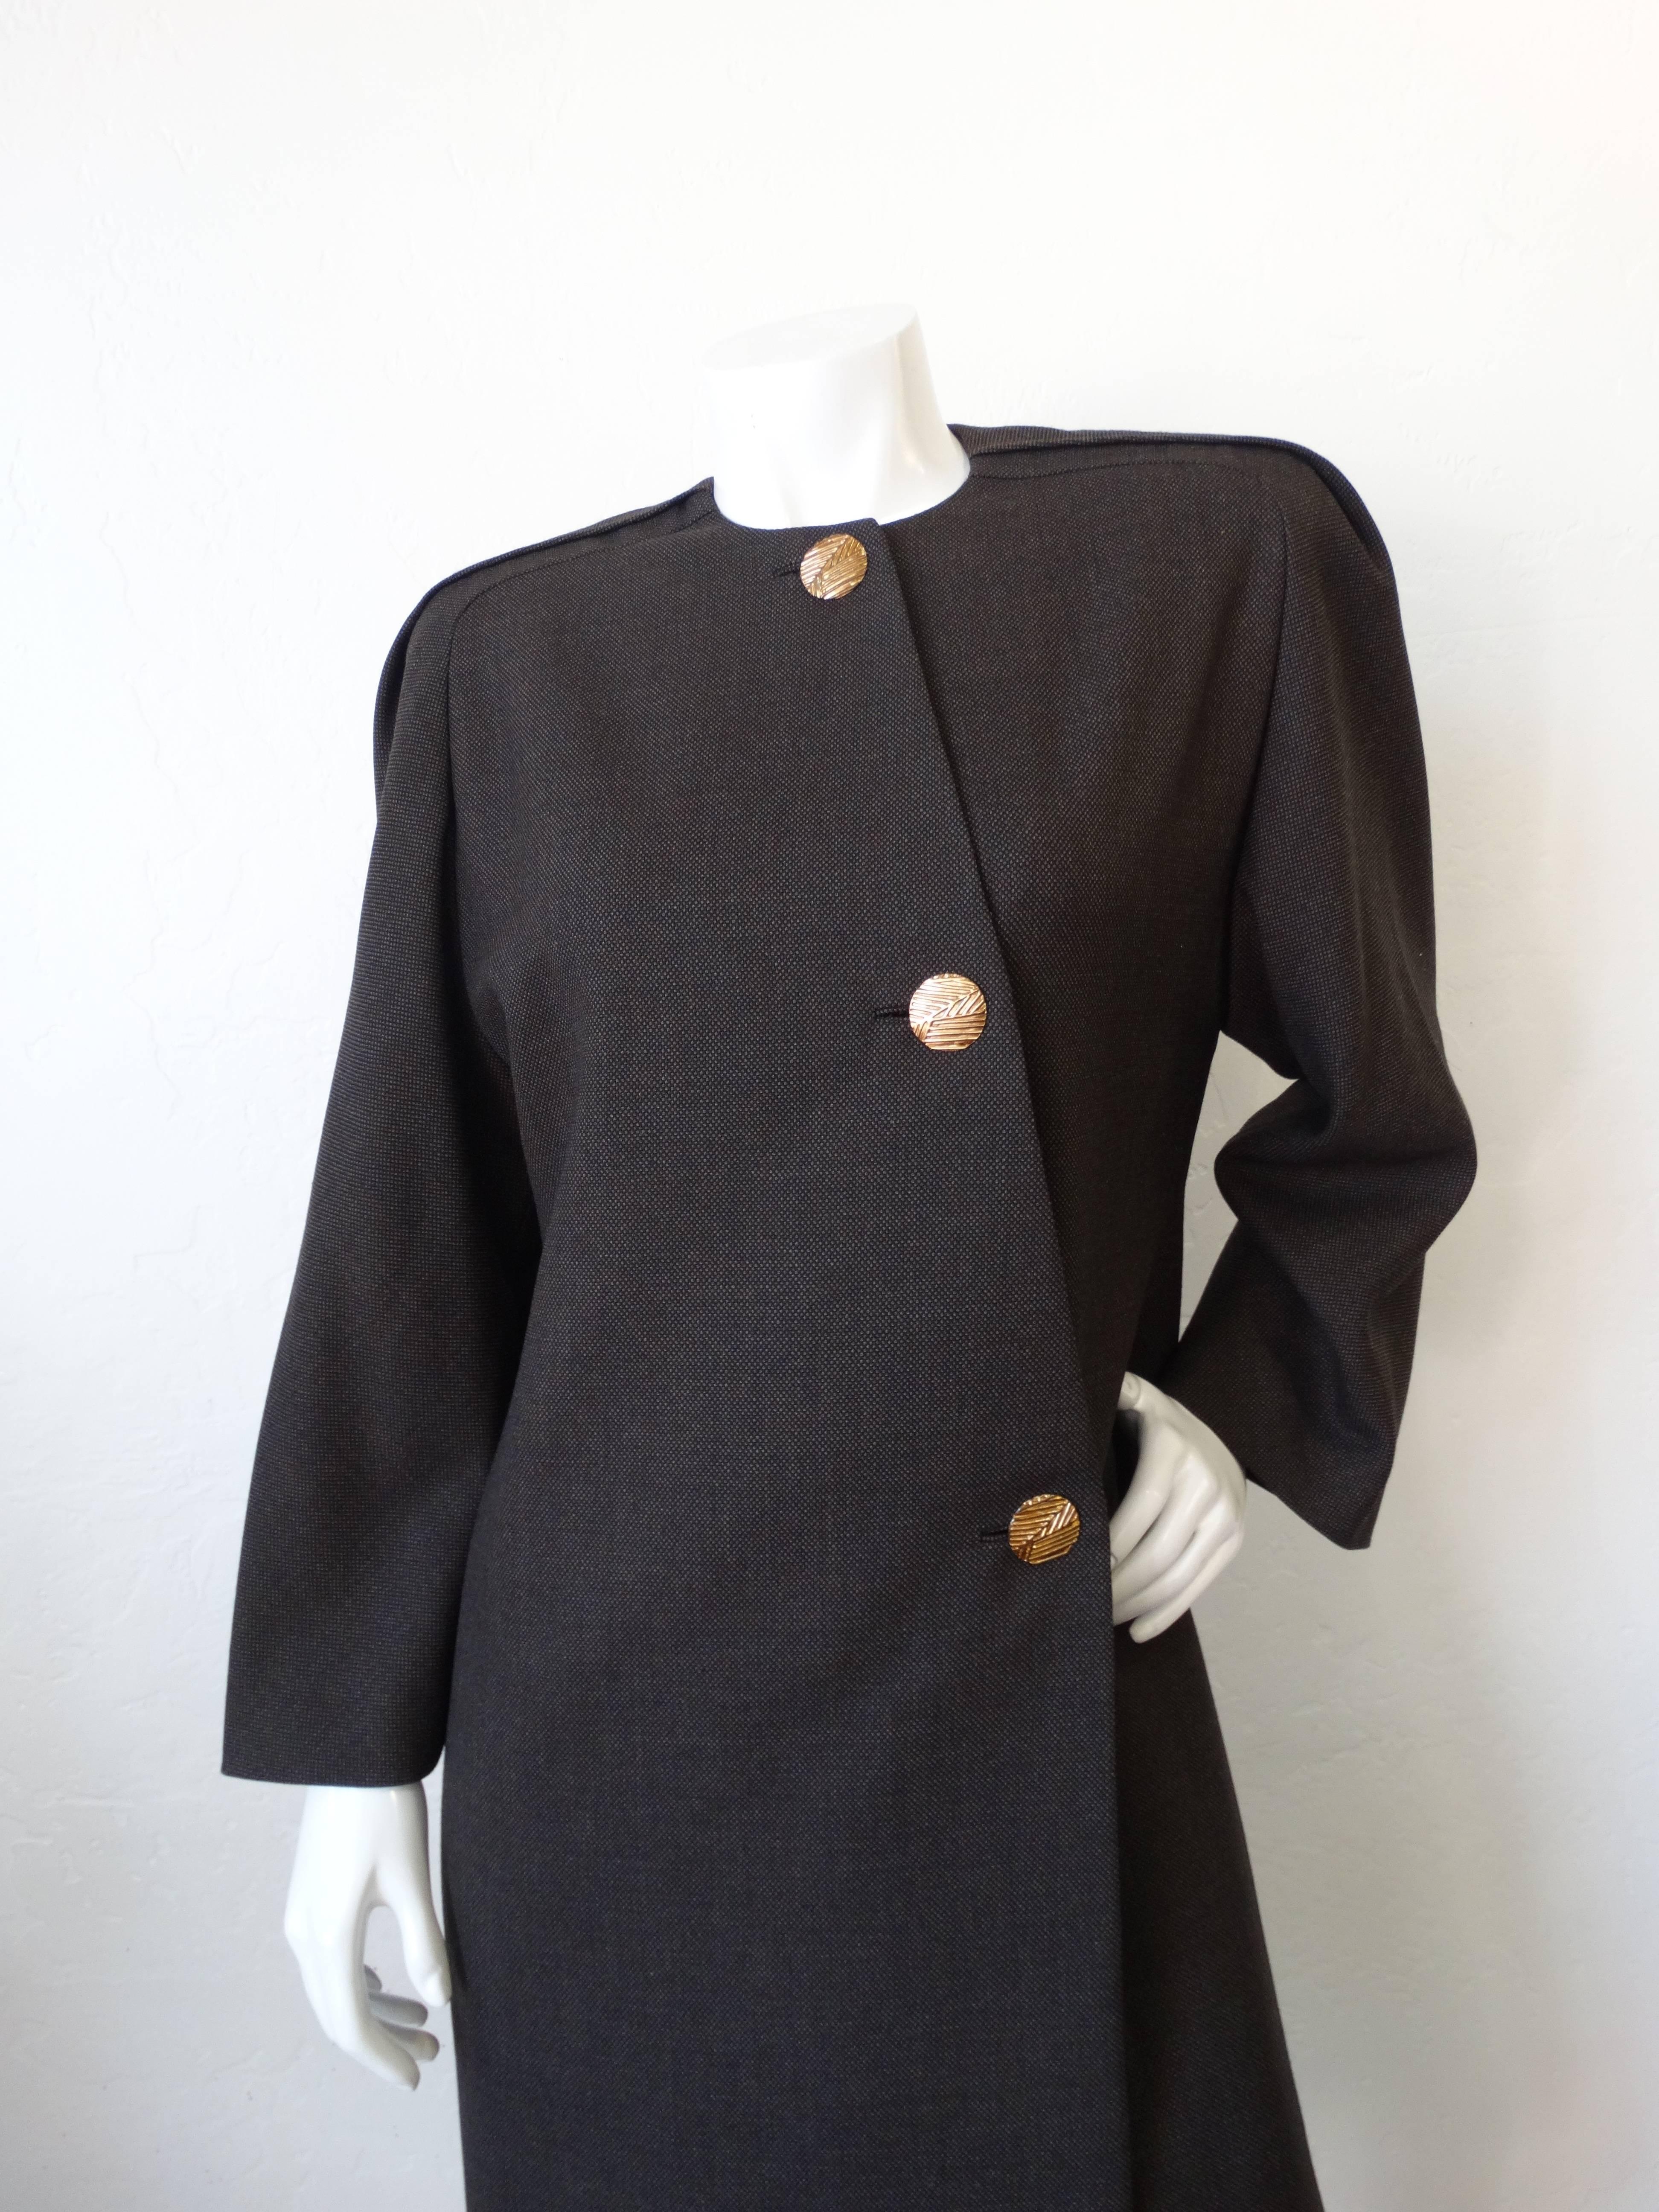 This piece is giving us vintage meets Jacquemus vibes! This incredible 1980s Galanos piece can be worn open as a coat or closed as a dress- it's up to you! Dark cool grey fabric with gold oversized buttons down the front. Asymmetrical button